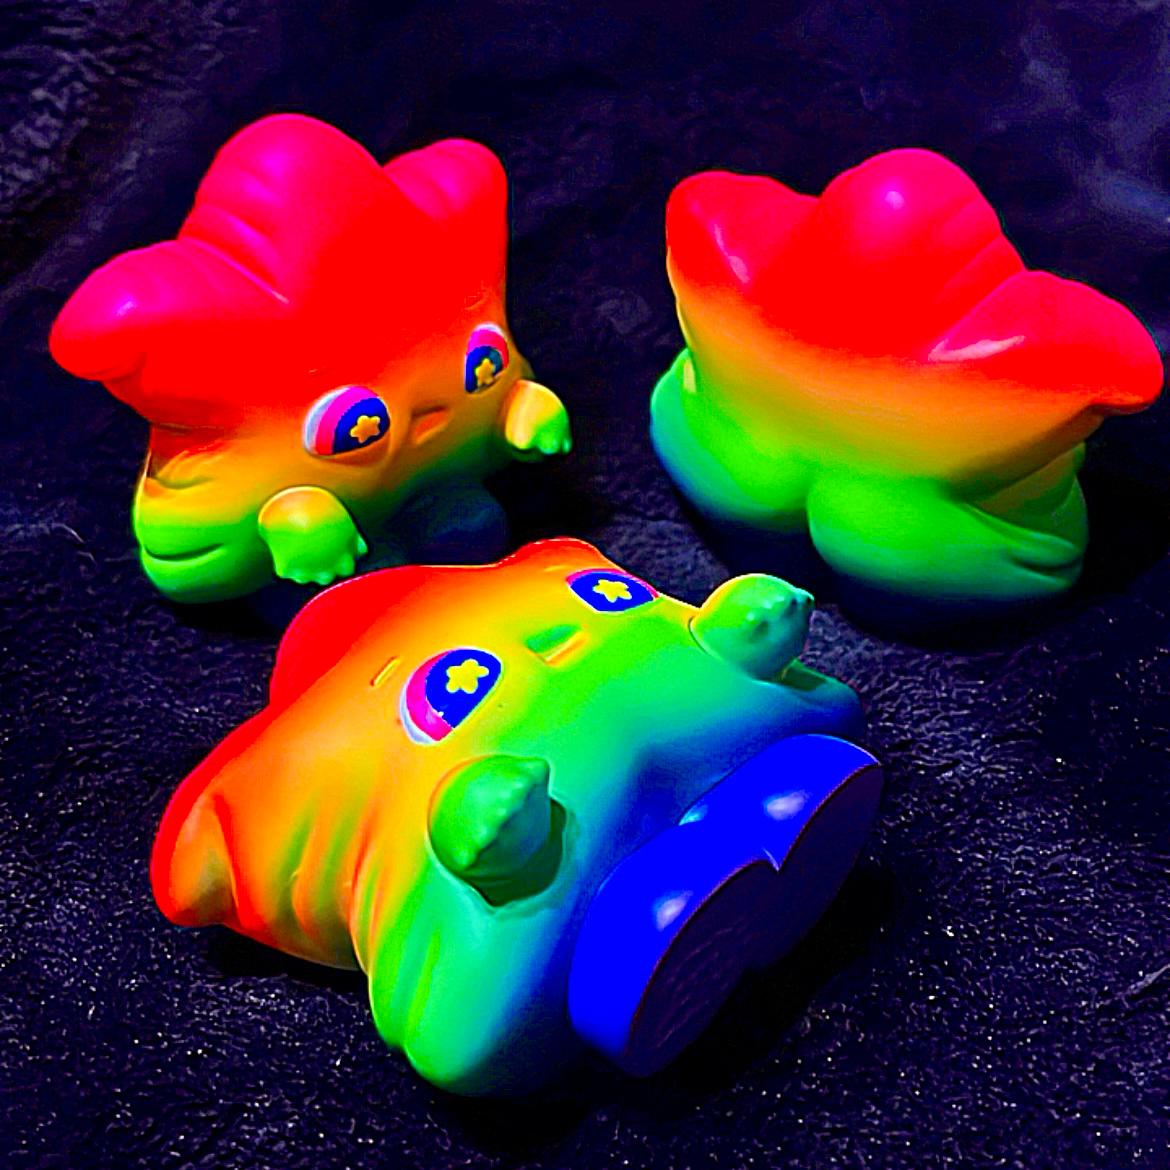 Rainbow Weee baby toy with star and animal figure, part of a group of baby toys.